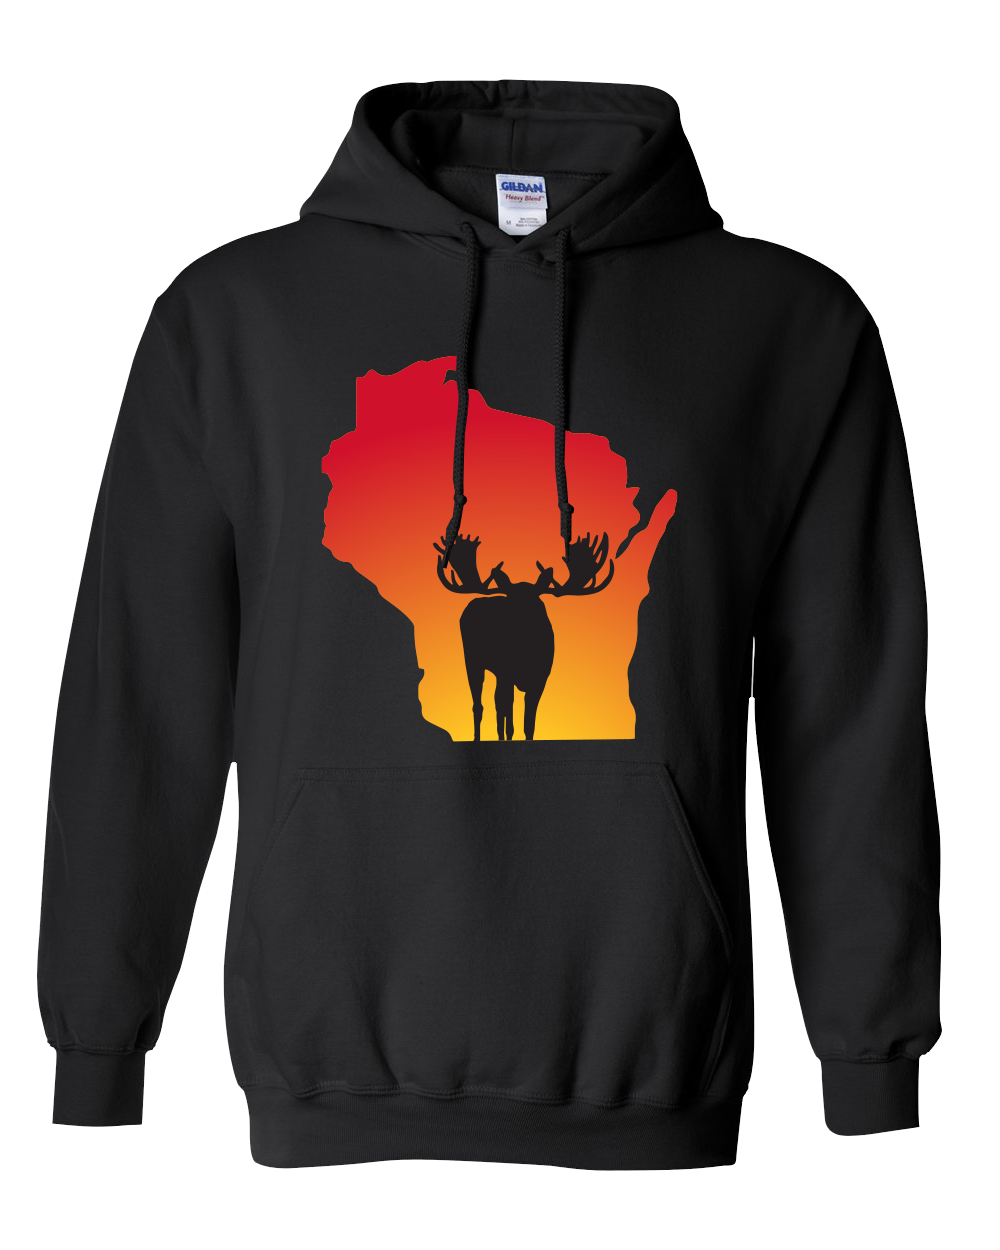 Pullover Hooded Sweatshirt Wisconsin Black Moose Vibrant Design High Quality Tight Knit Ring Spun Low Maintenance Cotton Printed With The Newest Available Color Transfer Technology